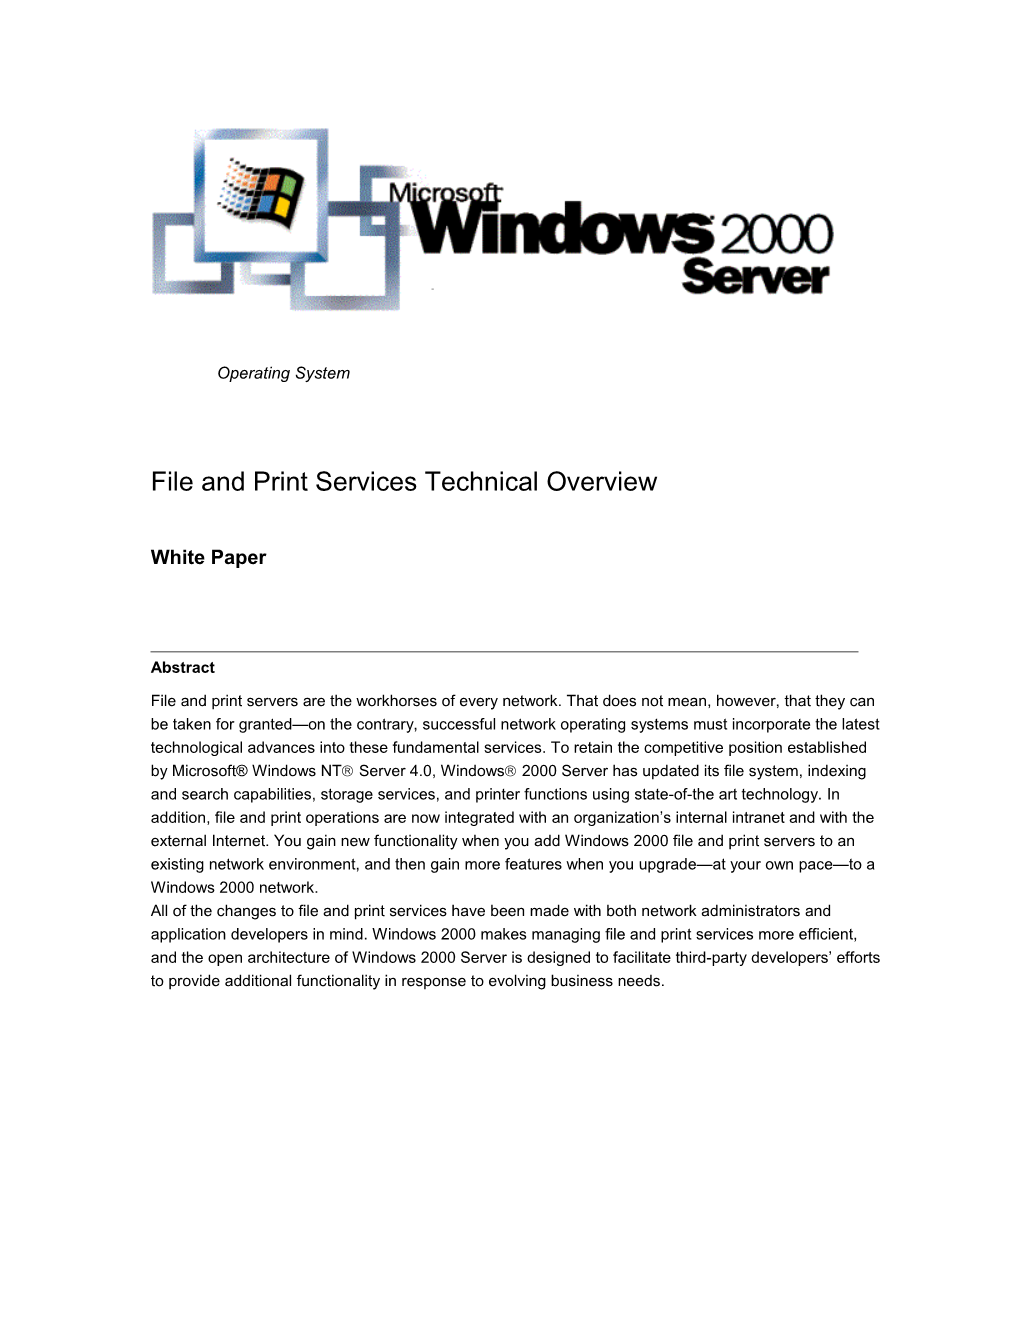 File and Print Services Technical Overview